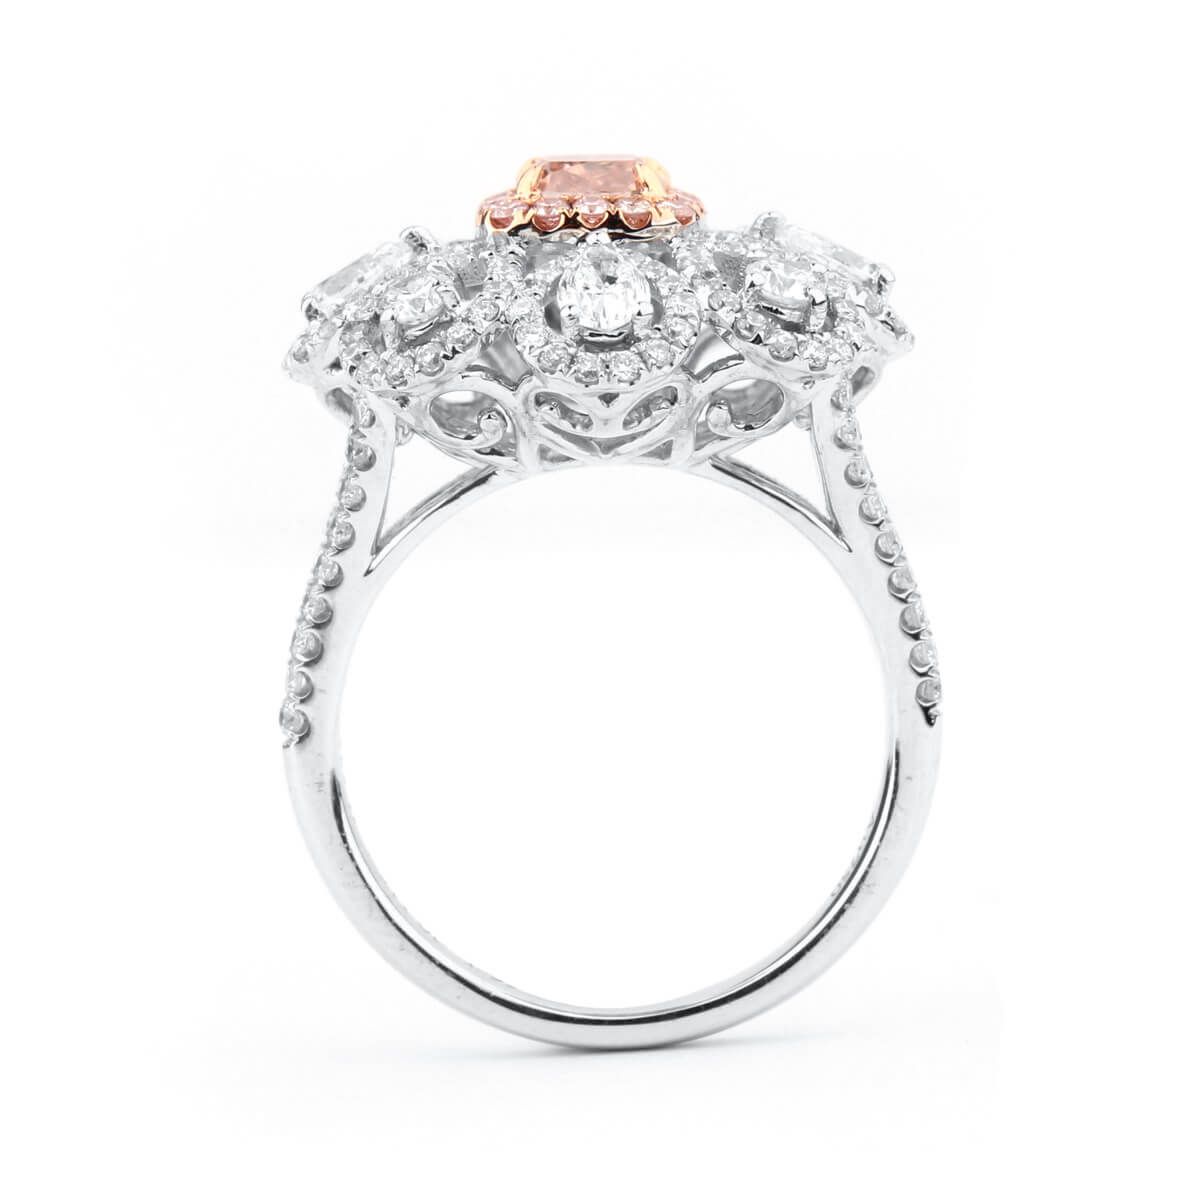 Fancy Orangy Pink Diamond Ring, 0.66 Ct. (2.31 Ct. TW), Radiant shape, GIA Certified, 1162871776